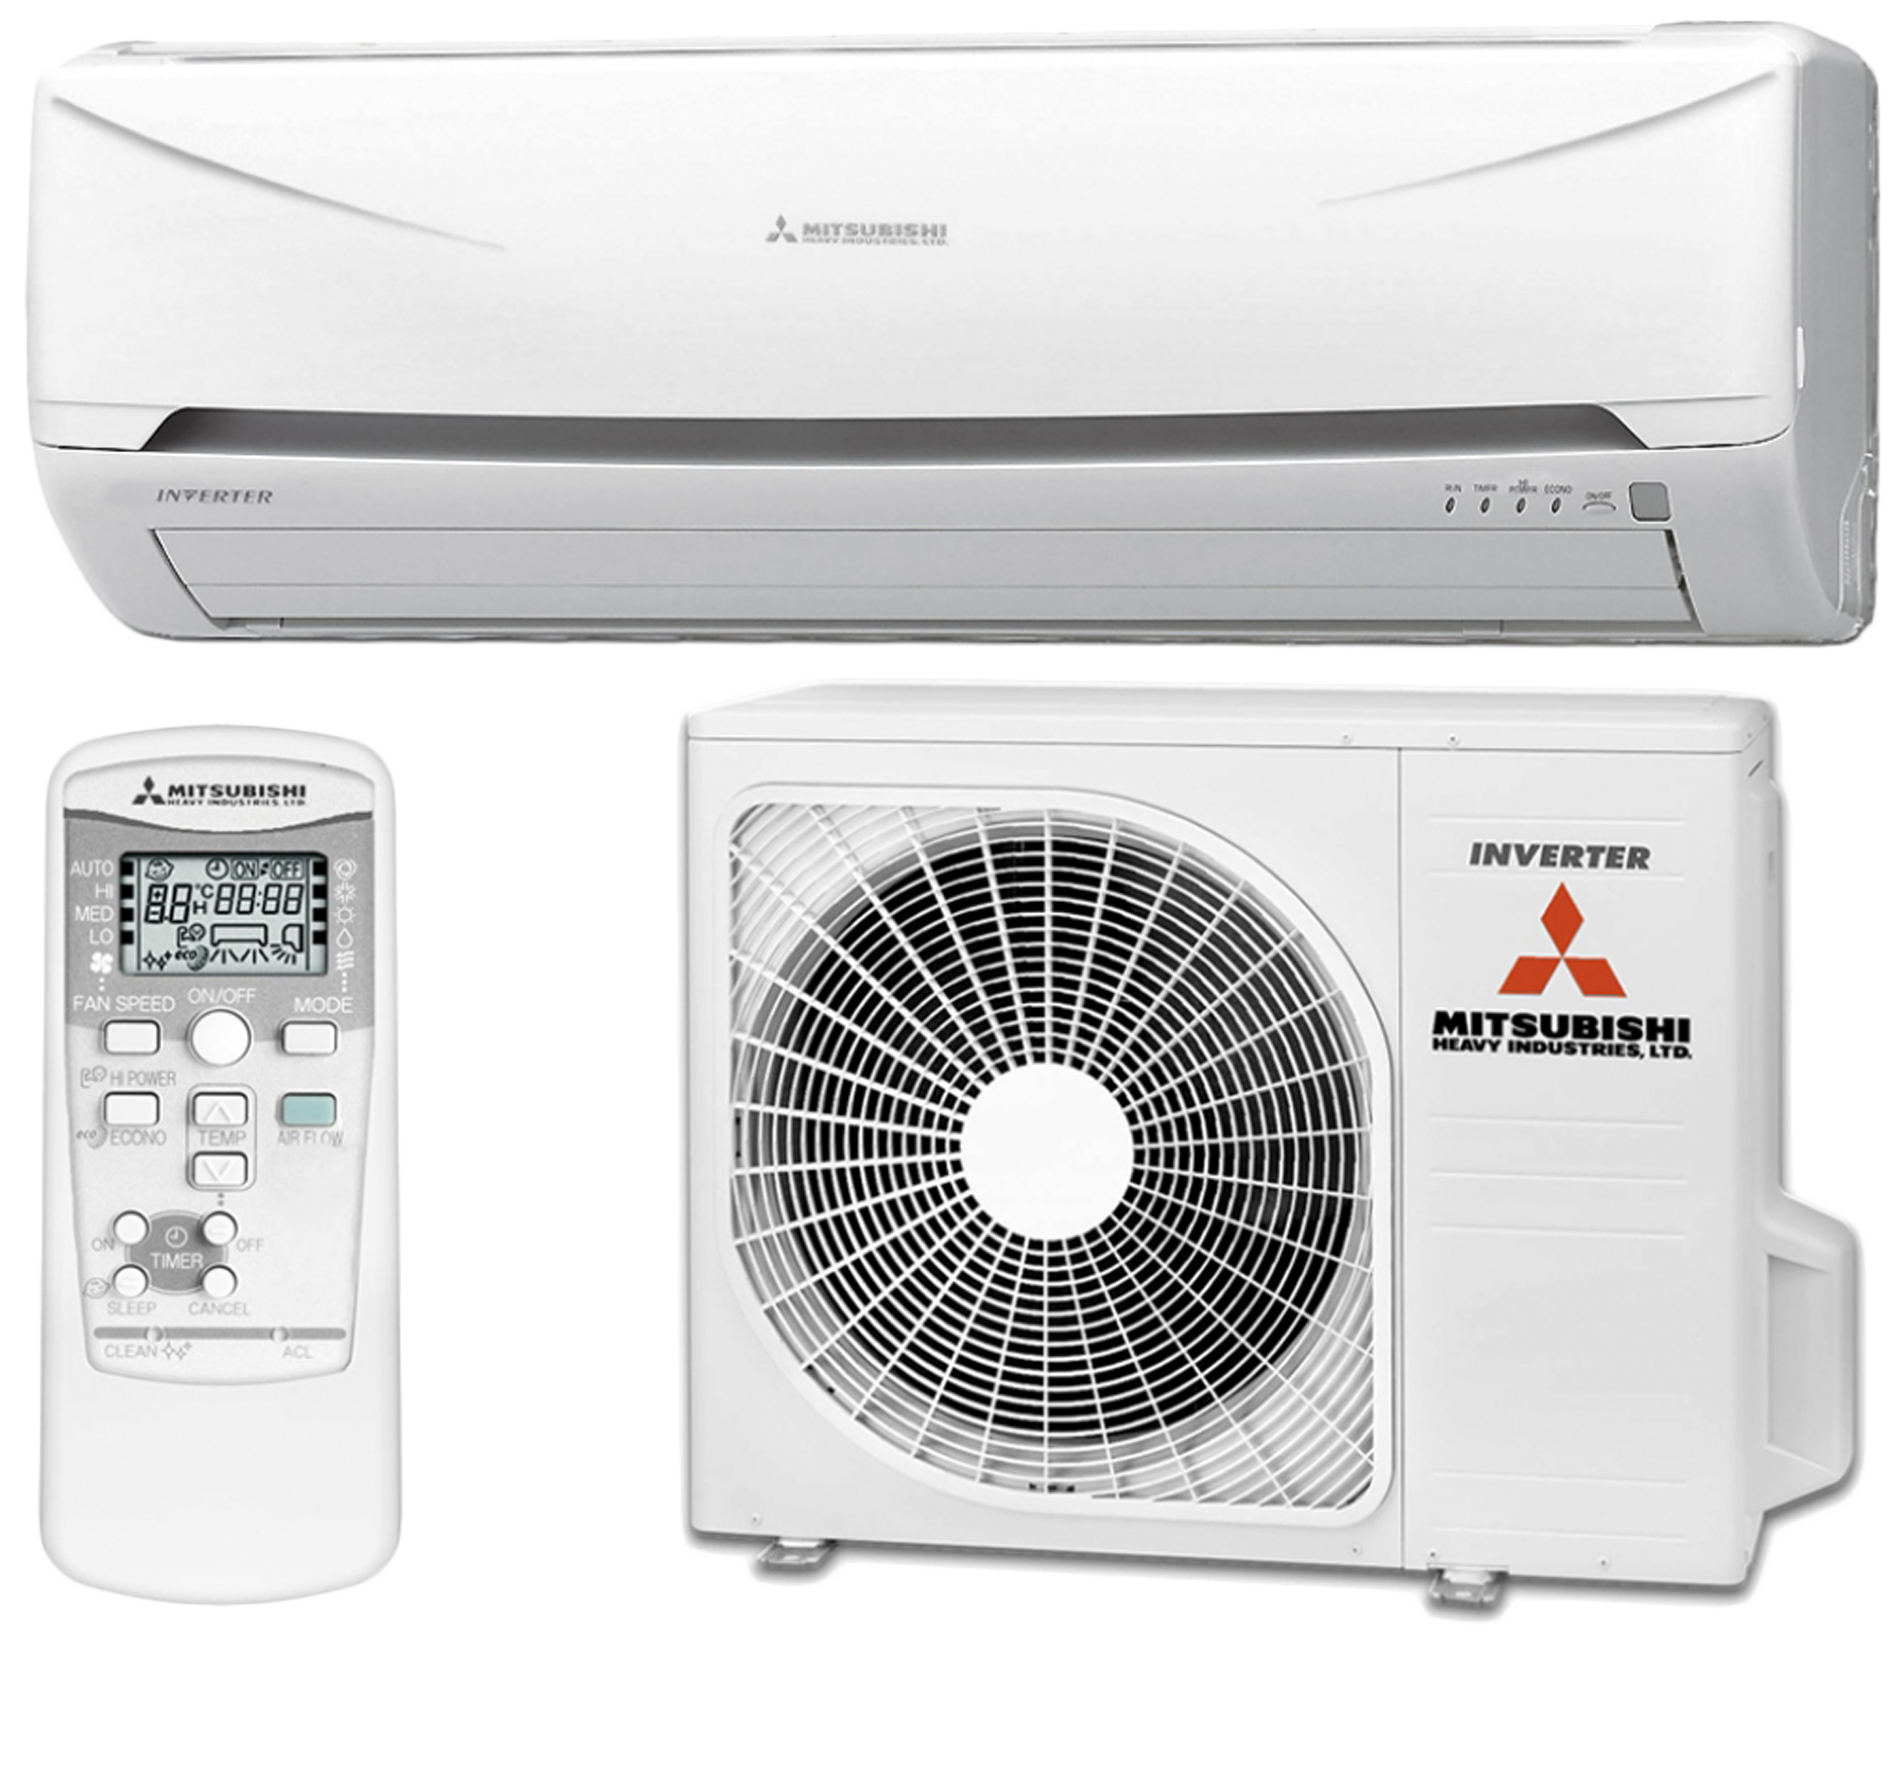 Air conditioner PNG image free Download 